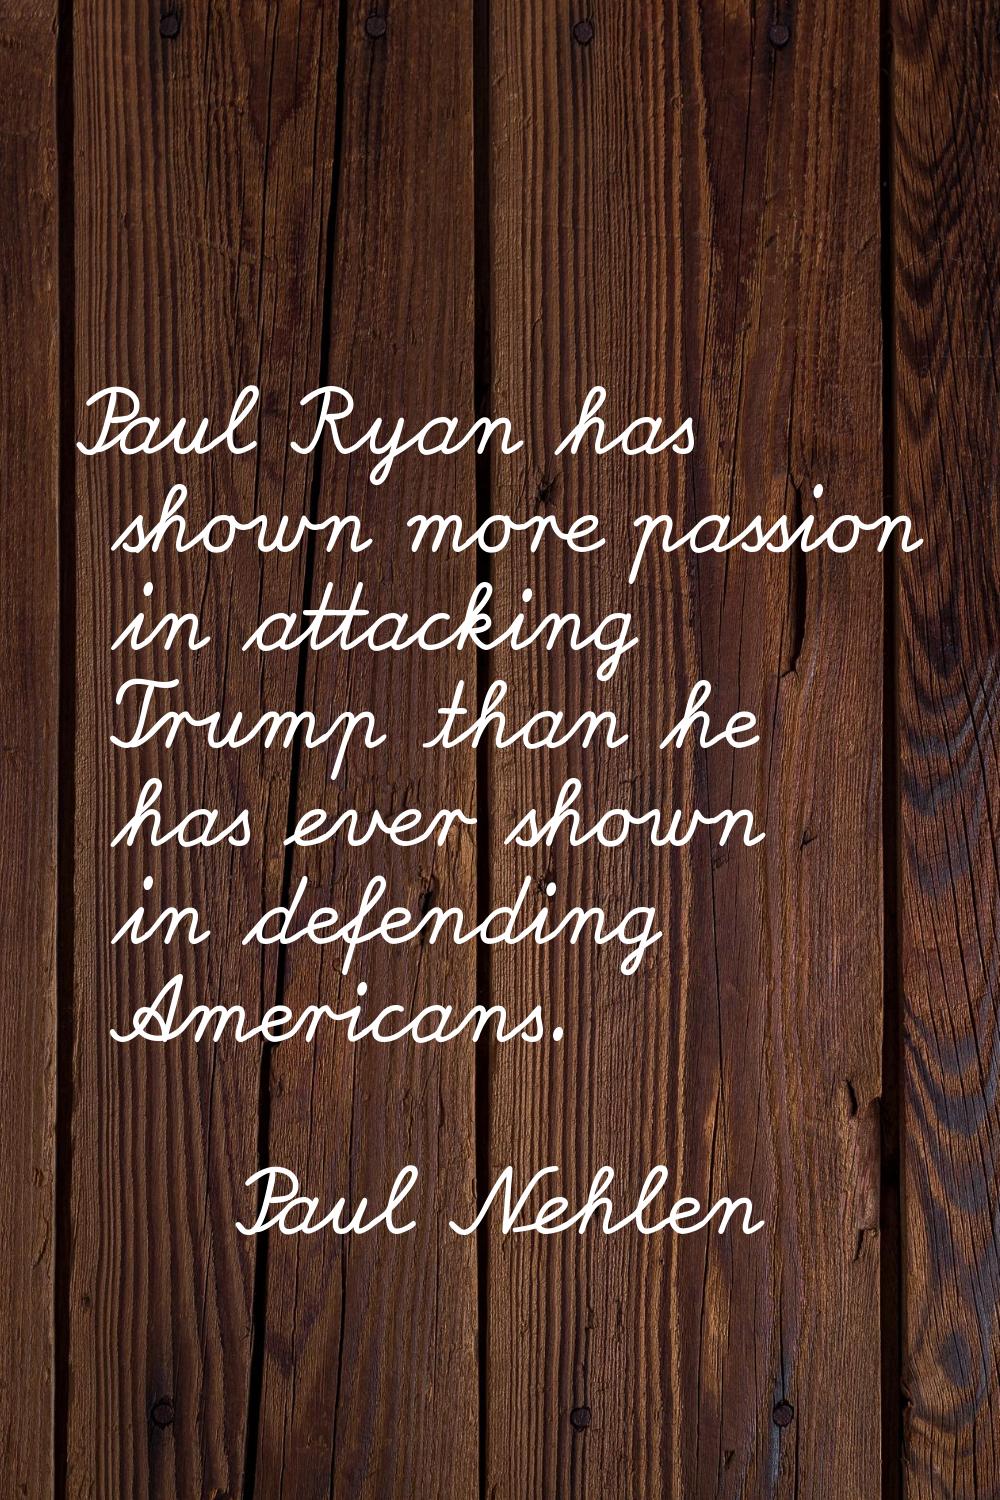 Paul Ryan has shown more passion in attacking Trump than he has ever shown in defending Americans.